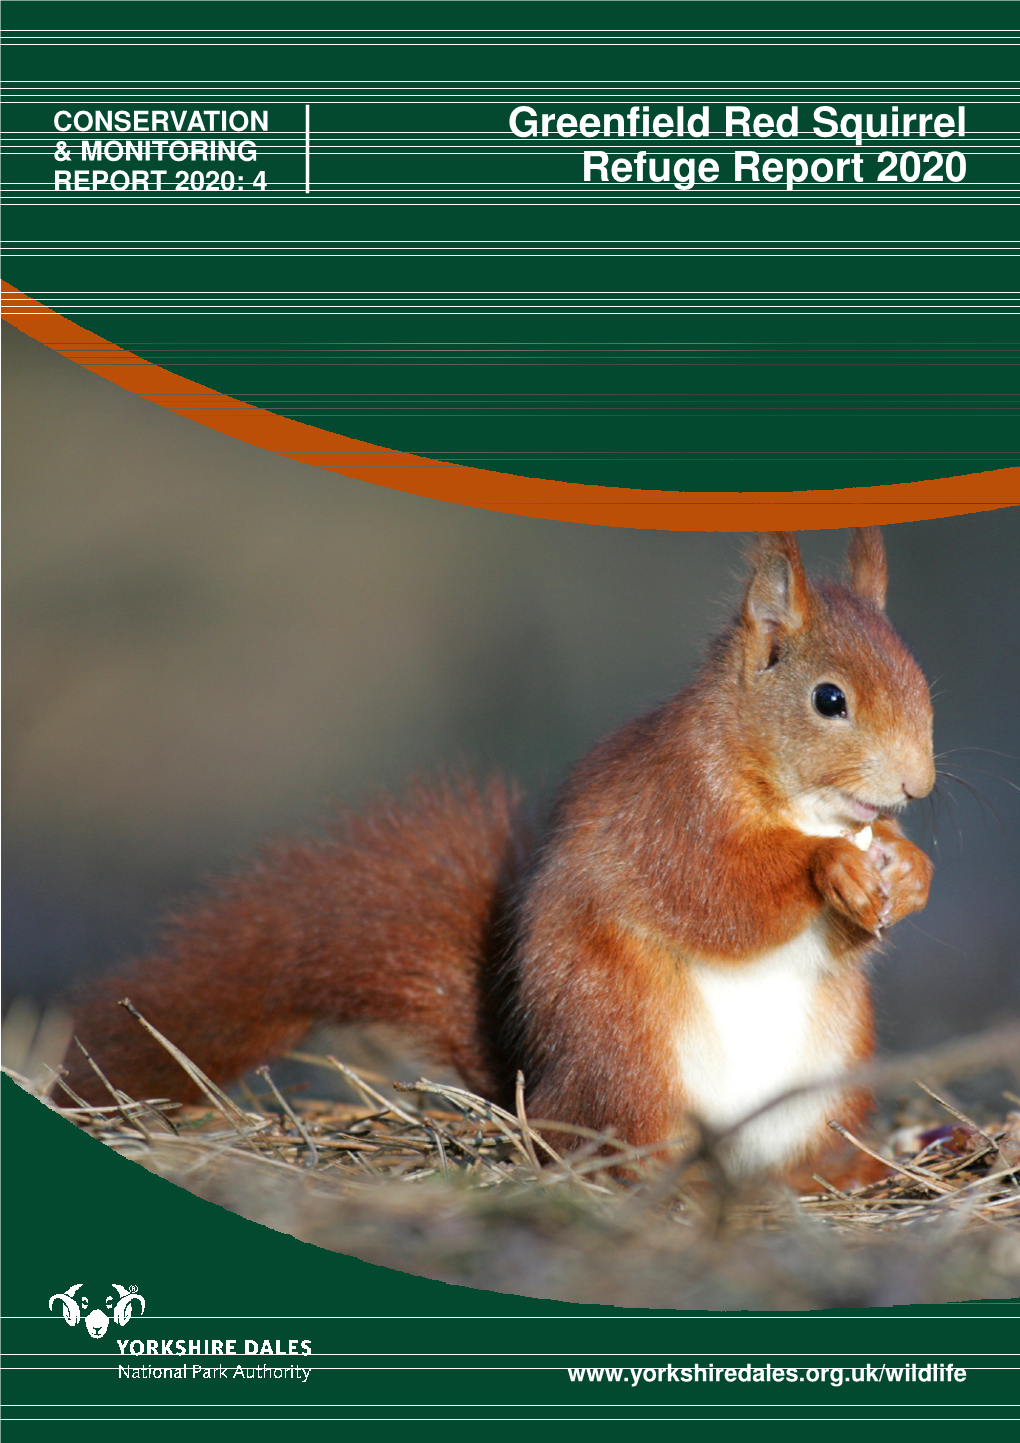 Template #4 Greenfield Red Squirrel Refuge Report 2020